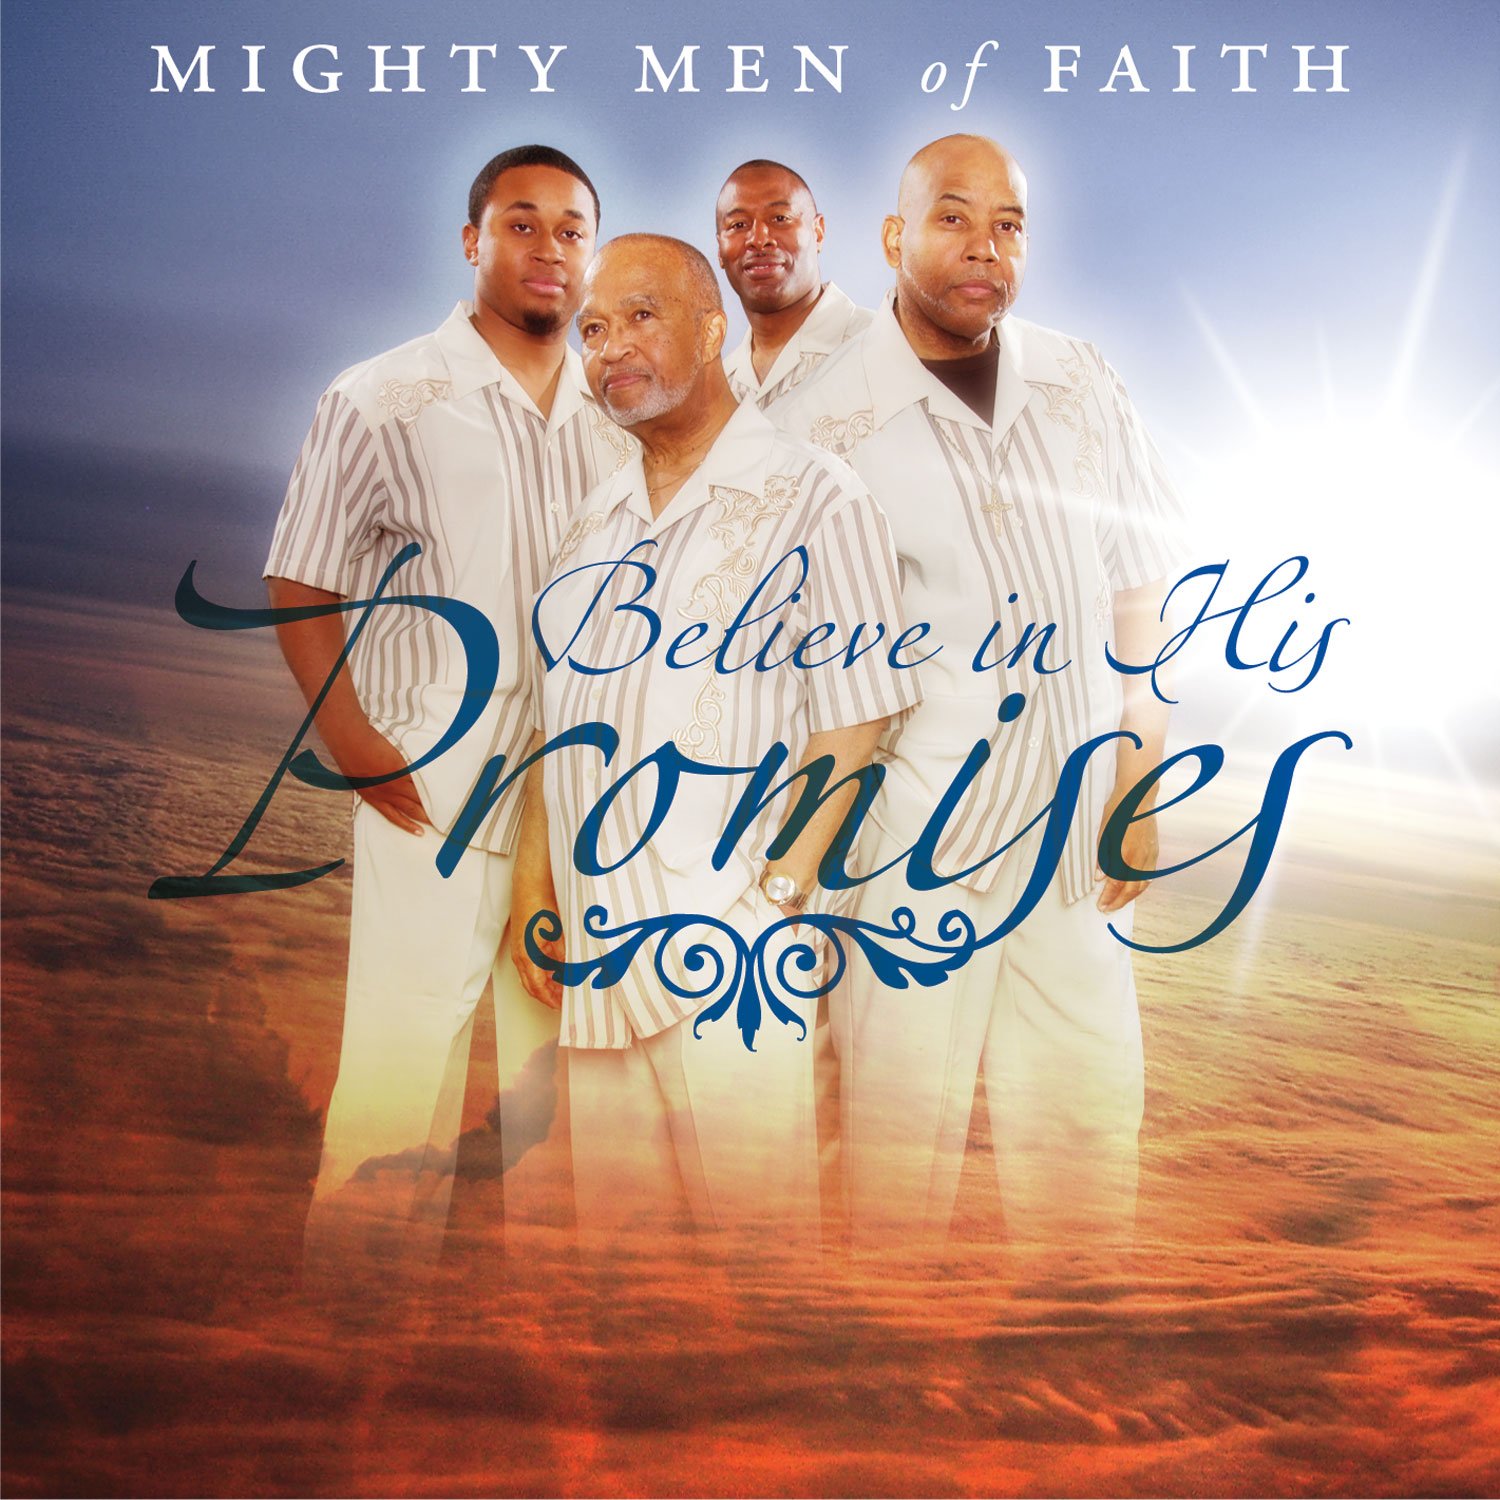 The Mighty Men of Faith announces the release of their new album “Believe in His Promises.”